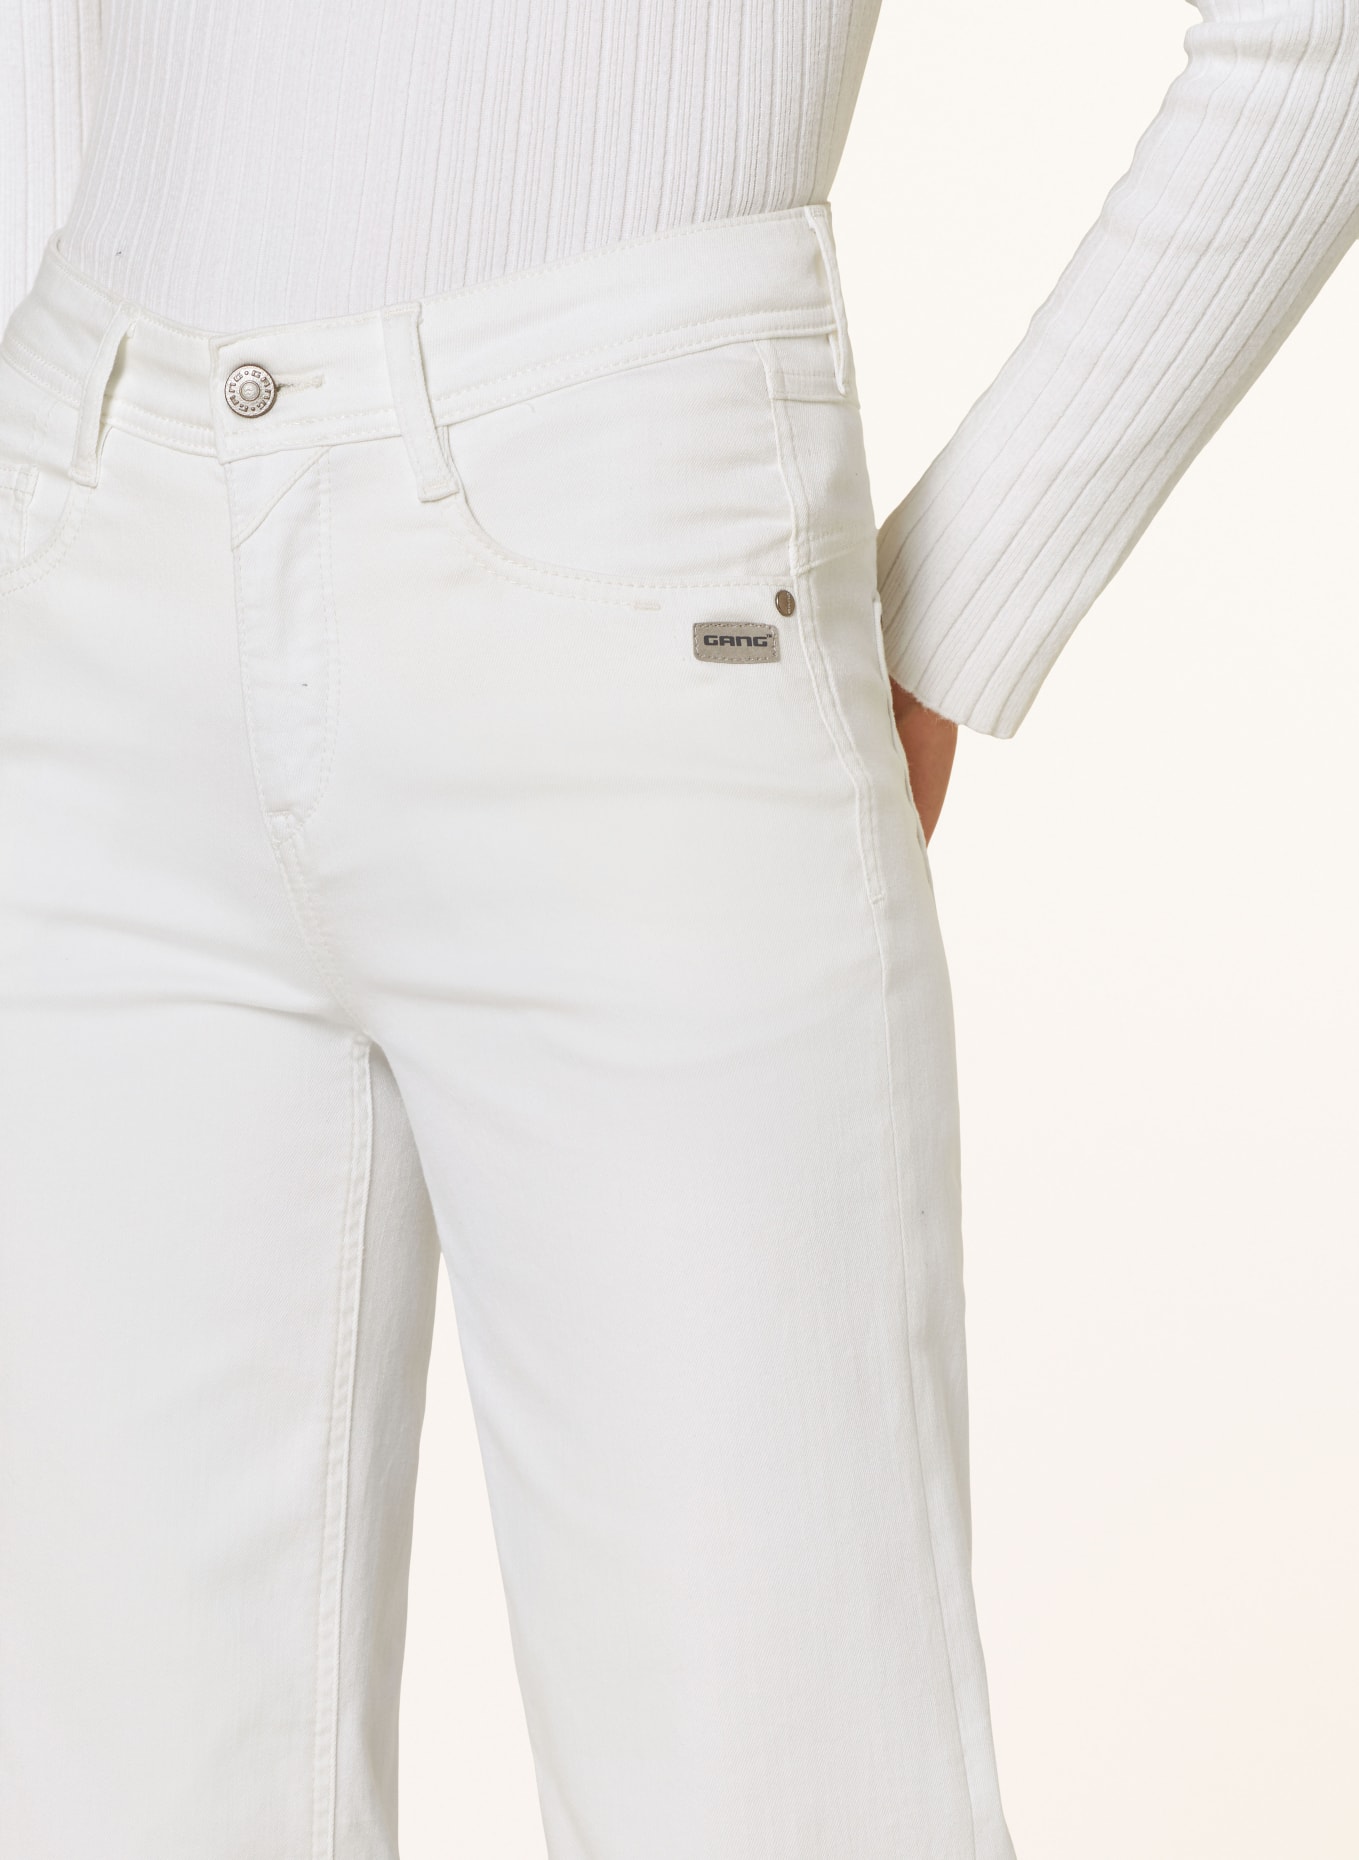 GANG Flared Jeans AMELIE, Farbe: 6007 off white (Bild 5)